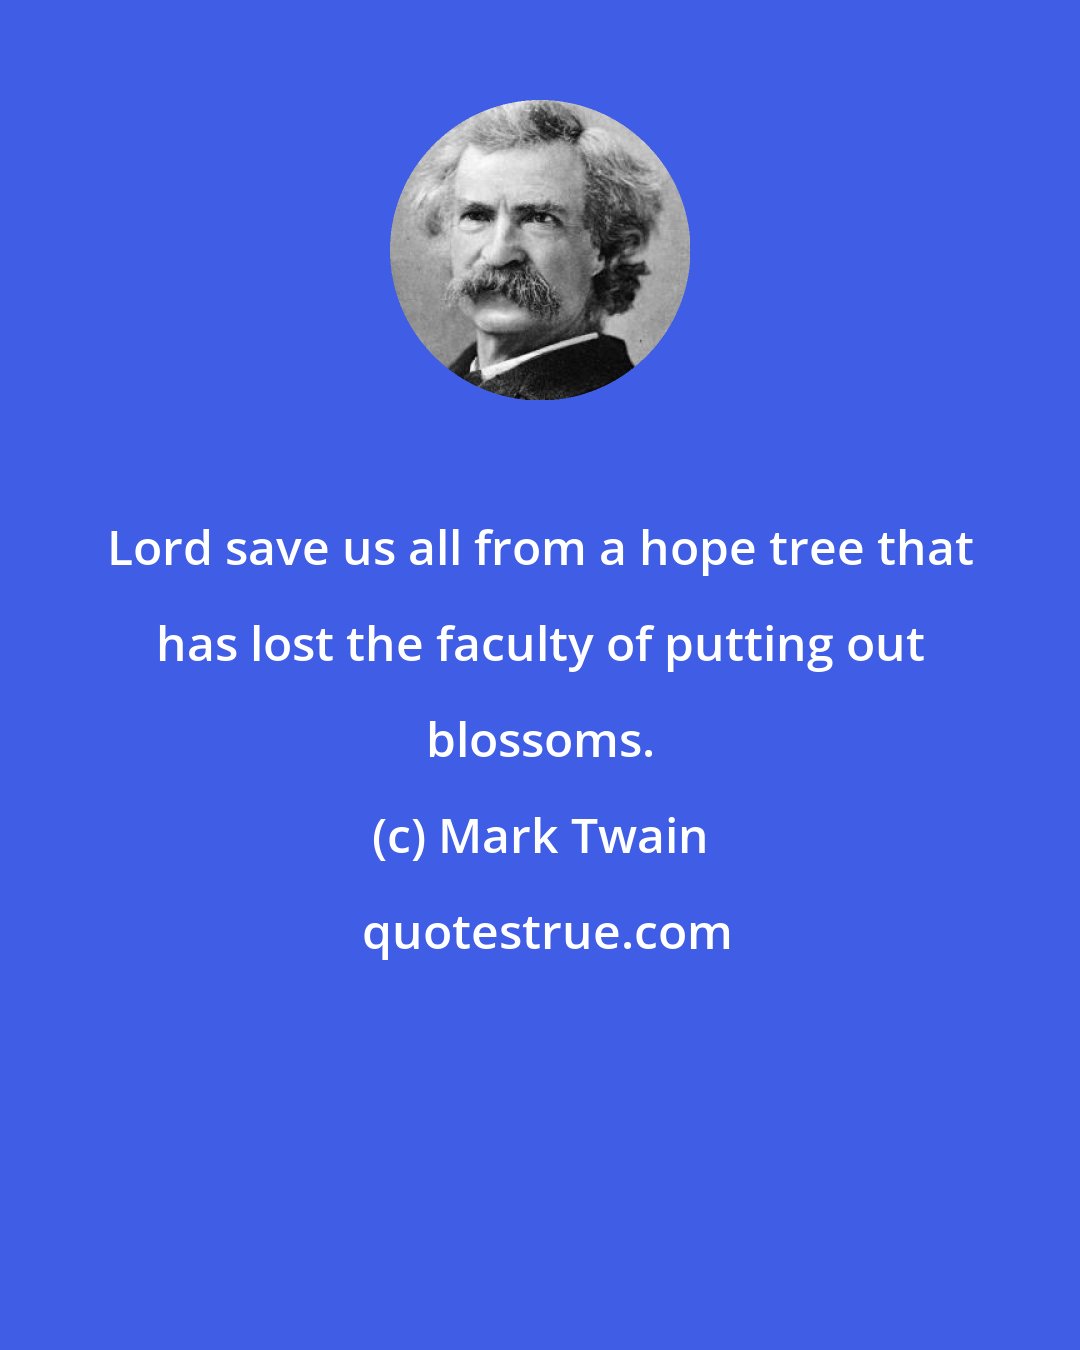 Mark Twain: Lord save us all from a hope tree that has lost the faculty of putting out blossoms.